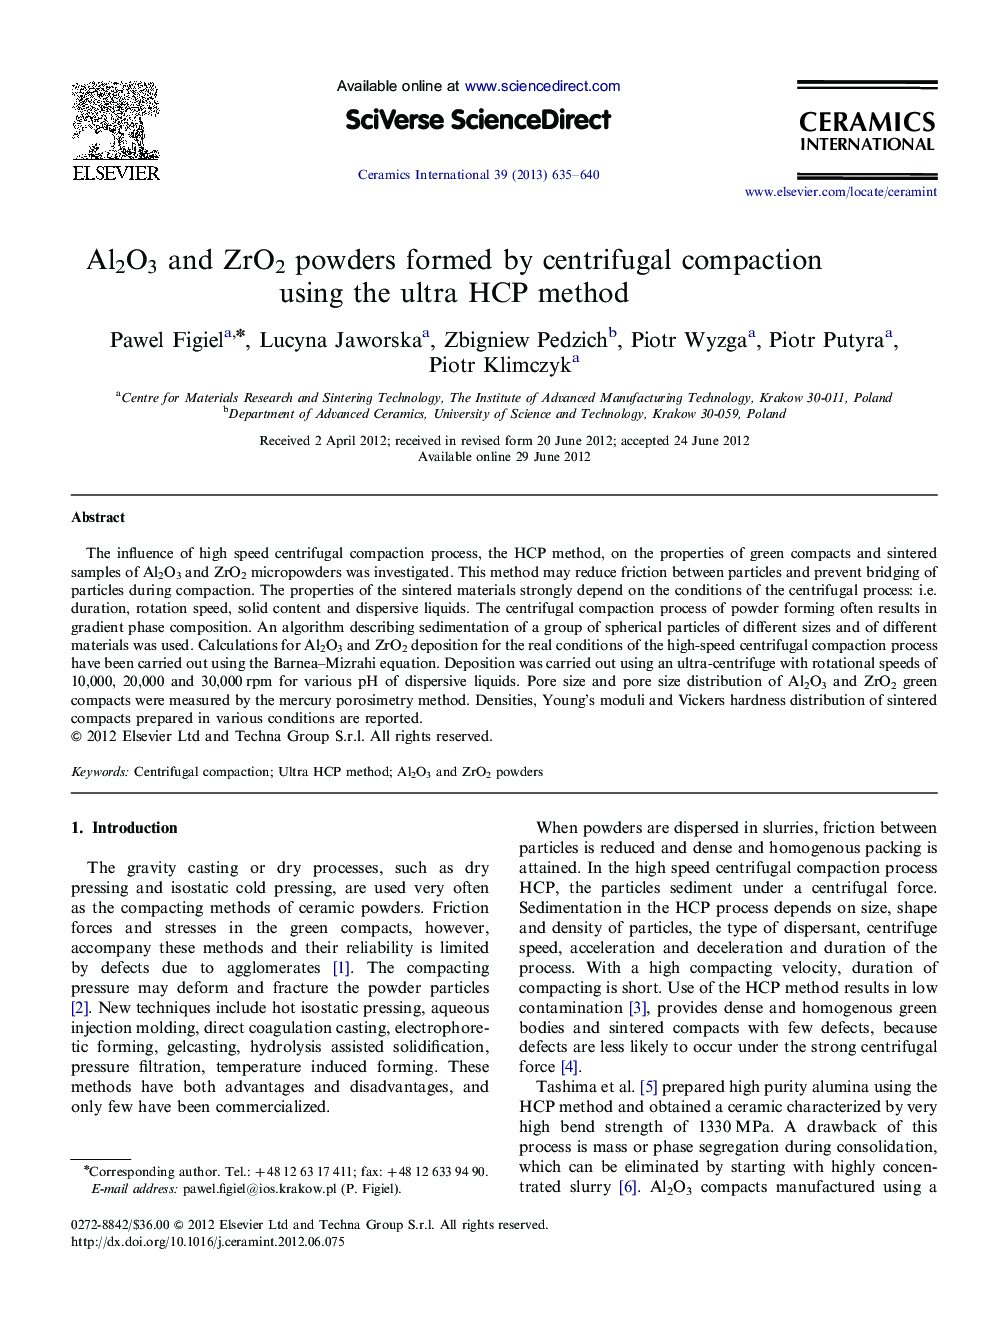 Al2O3 and ZrO2 powders formed by centrifugal compaction using the ultra HCP method